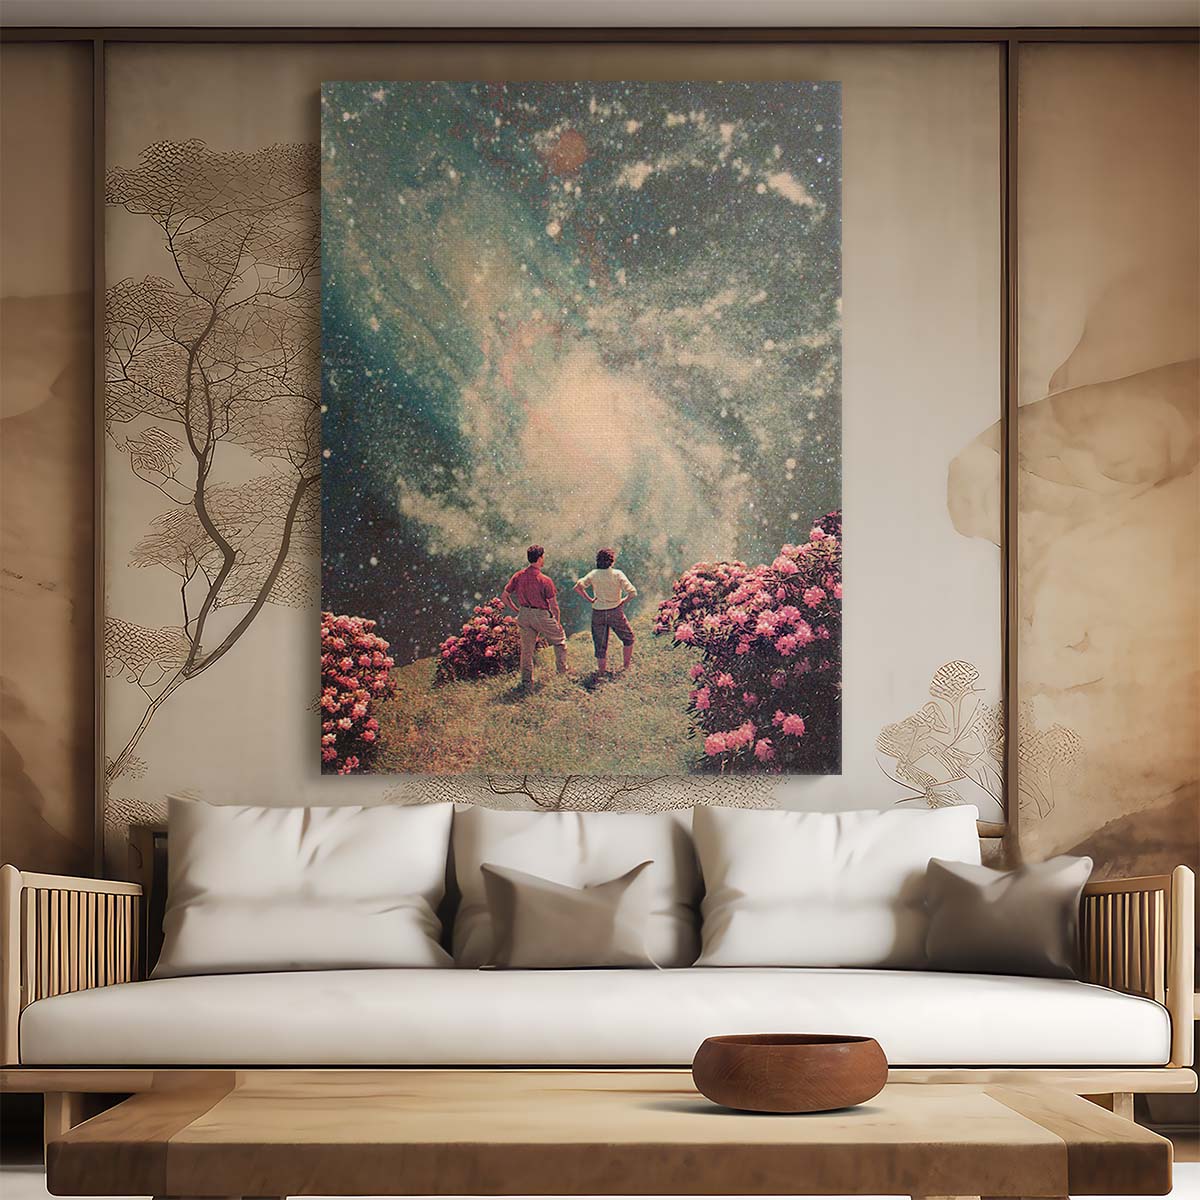 Surreal Starry Love Duo Digital Collage Art by Frank Moth by Luxuriance Designs, made in USA